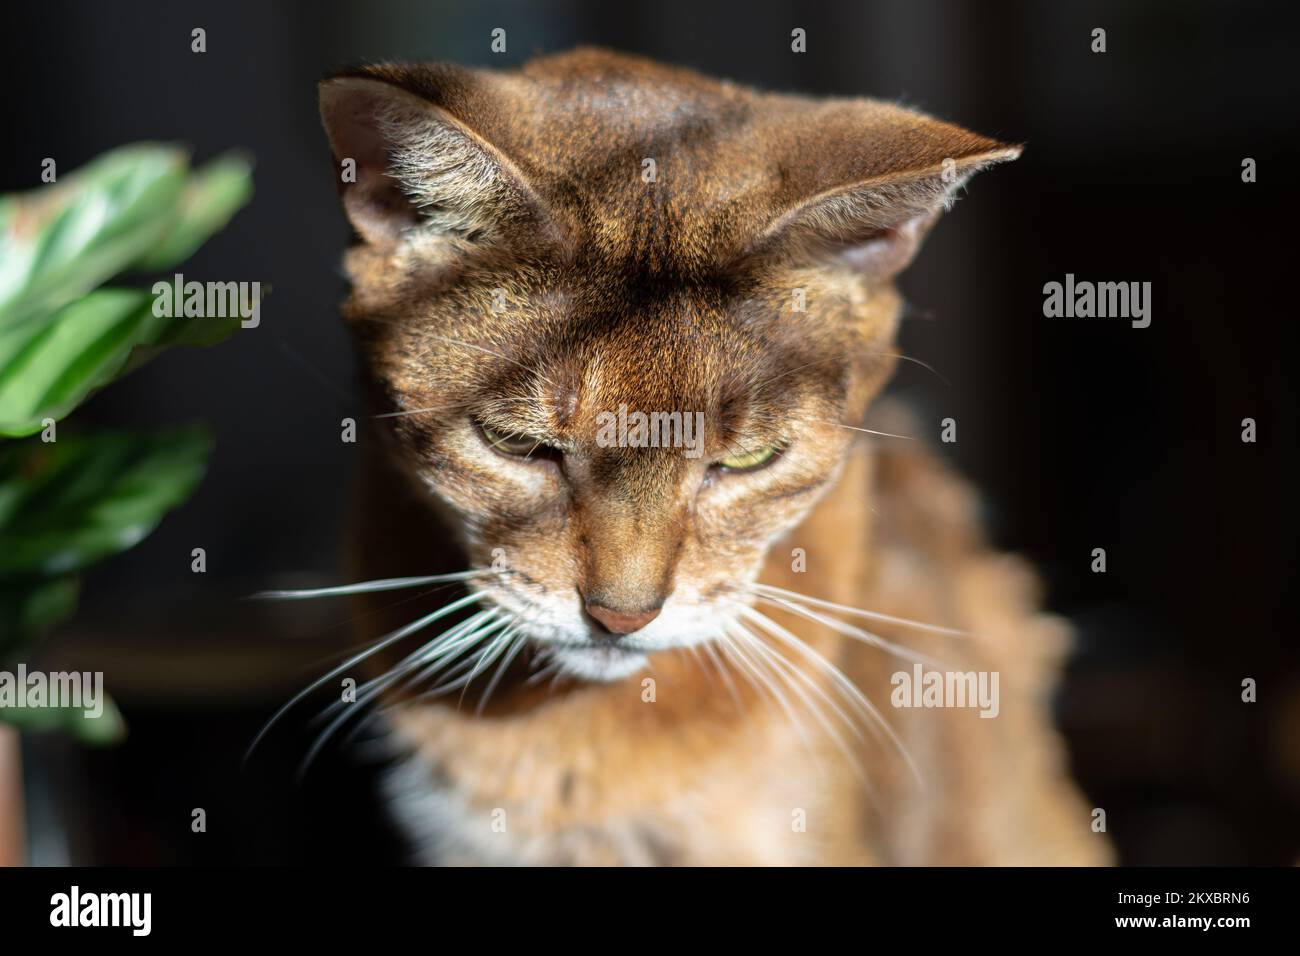 Close up of a contemplative Abyssinian cat sitting on a table with light and shadows Stock Photo